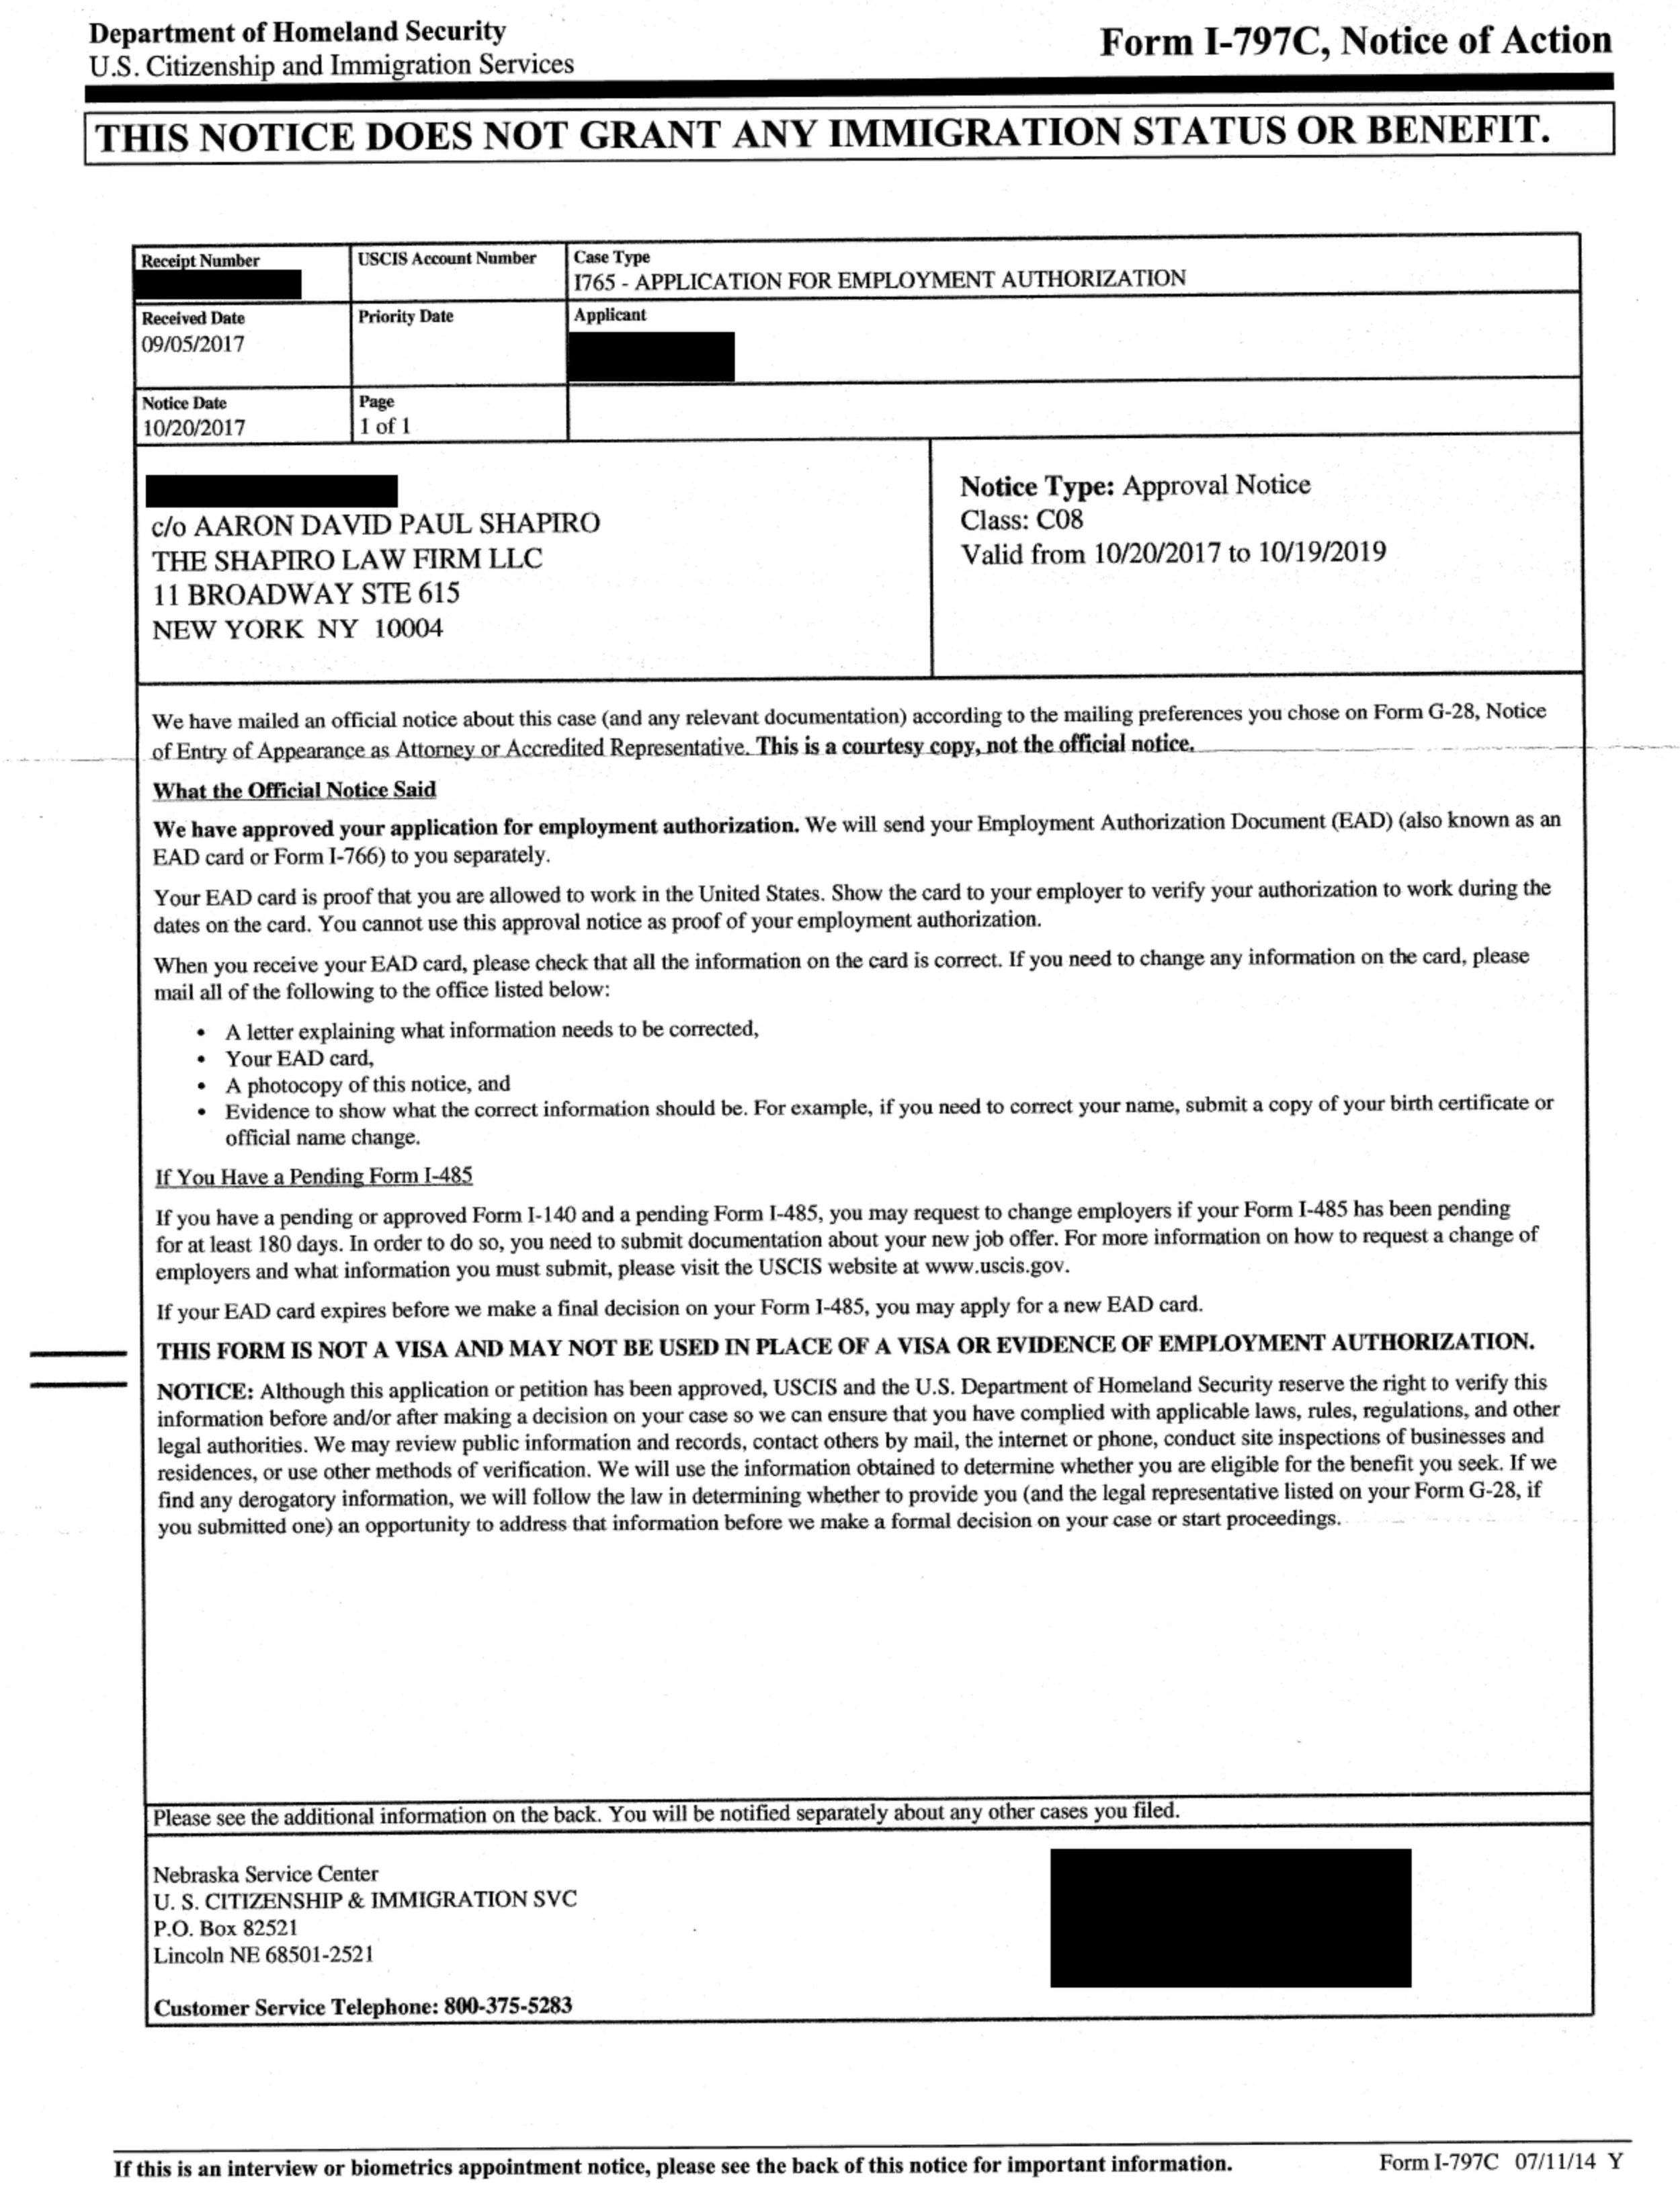 Form I-797C, I-765- Applicant for Employment Authorization, Approval Notice